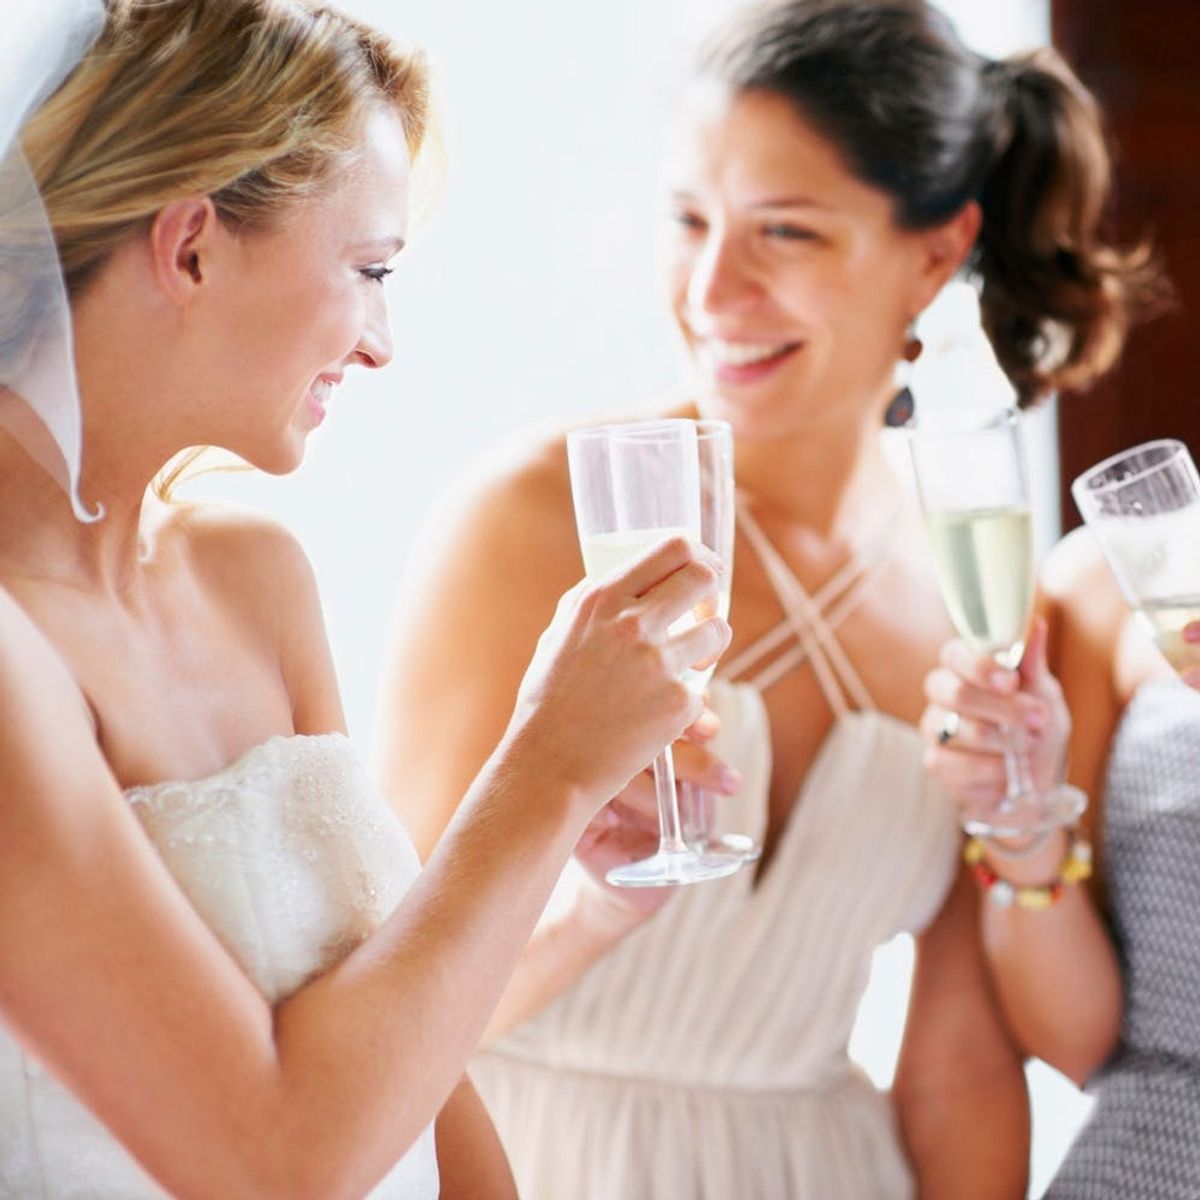 How to Deal When All Your Friends Are Getting Married and You’re Still Single